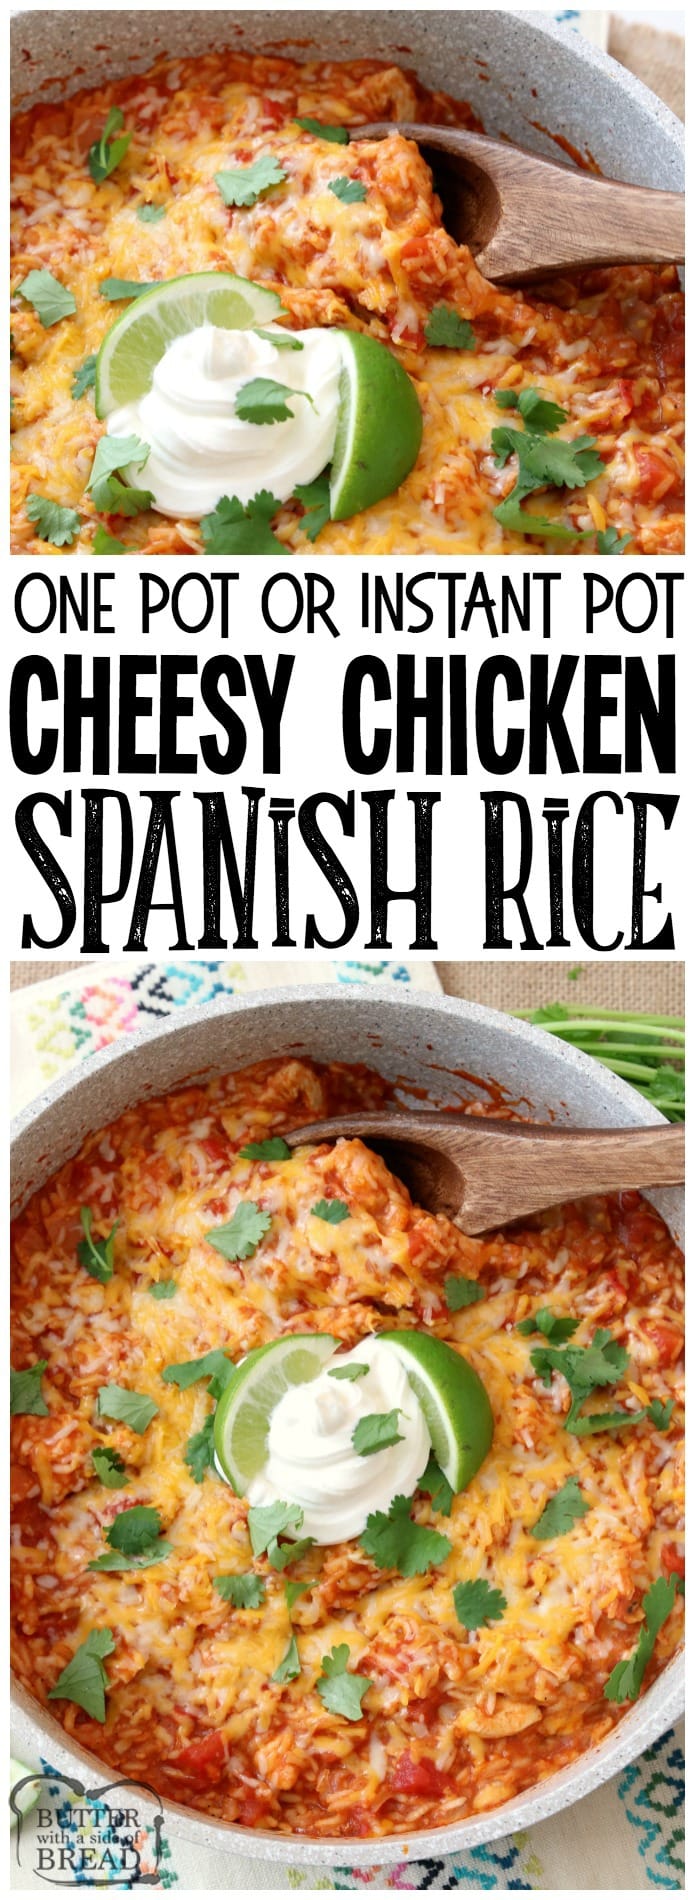 Cheesy Chicken & Spanish Rice is a quick & easy weeknight meal! Great flavor in this comforting One-Pot Spanish Rice recipe with added chicken and cheese. Can be made on the stove or in an Instant Pot! Easy Spanish Rice recipe from Butter With A Side of Bread